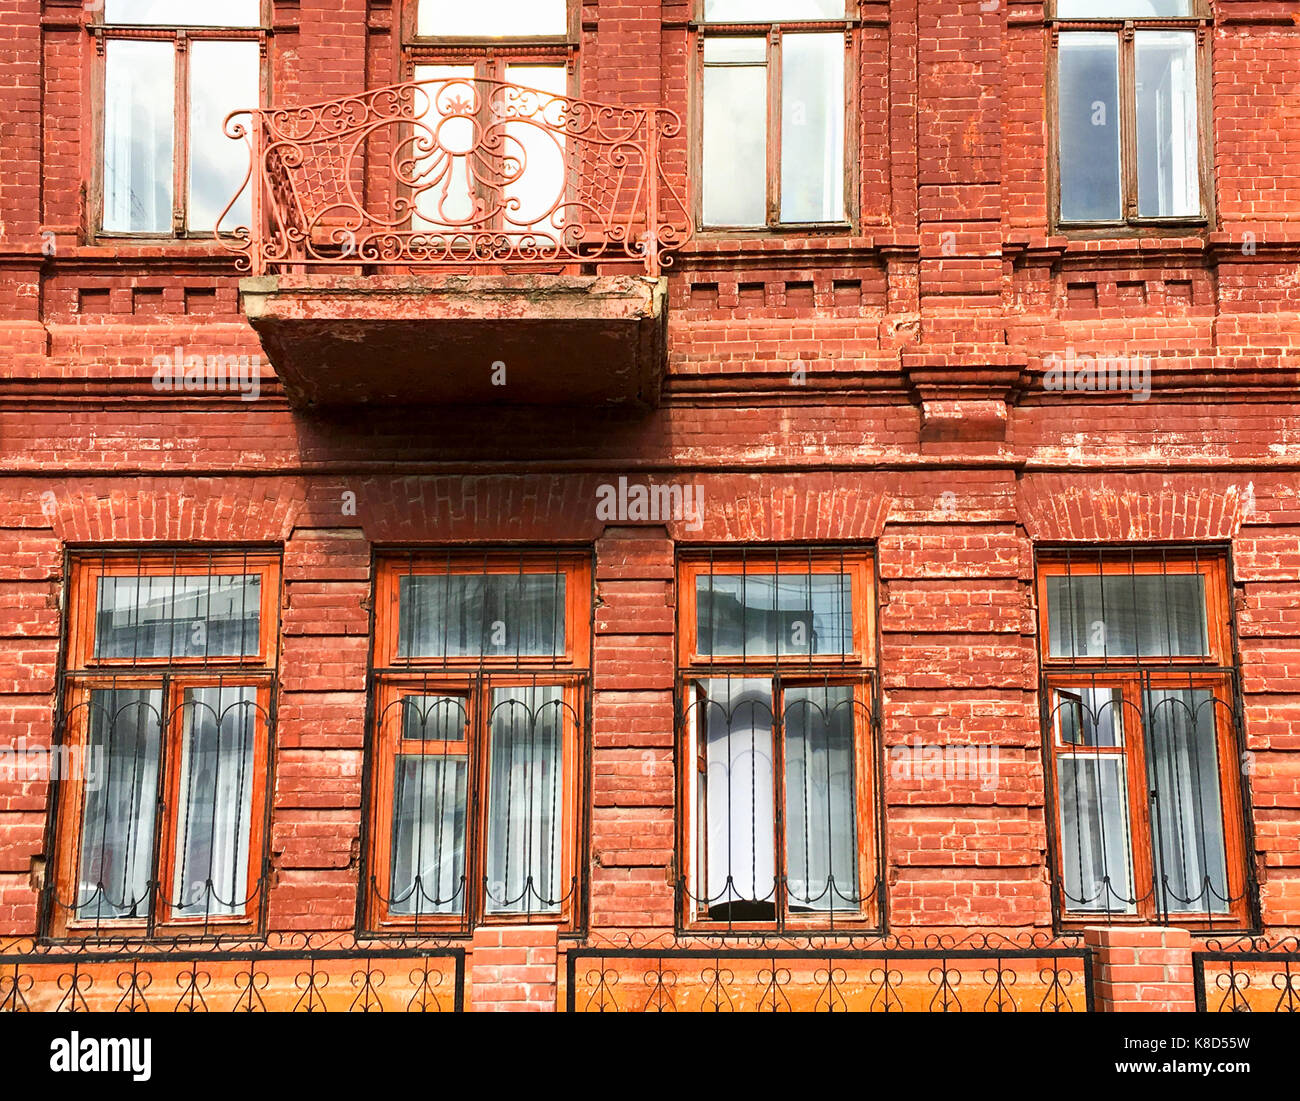 Brick building industrial facade with multiple windows. Industrial background. Stock Photo